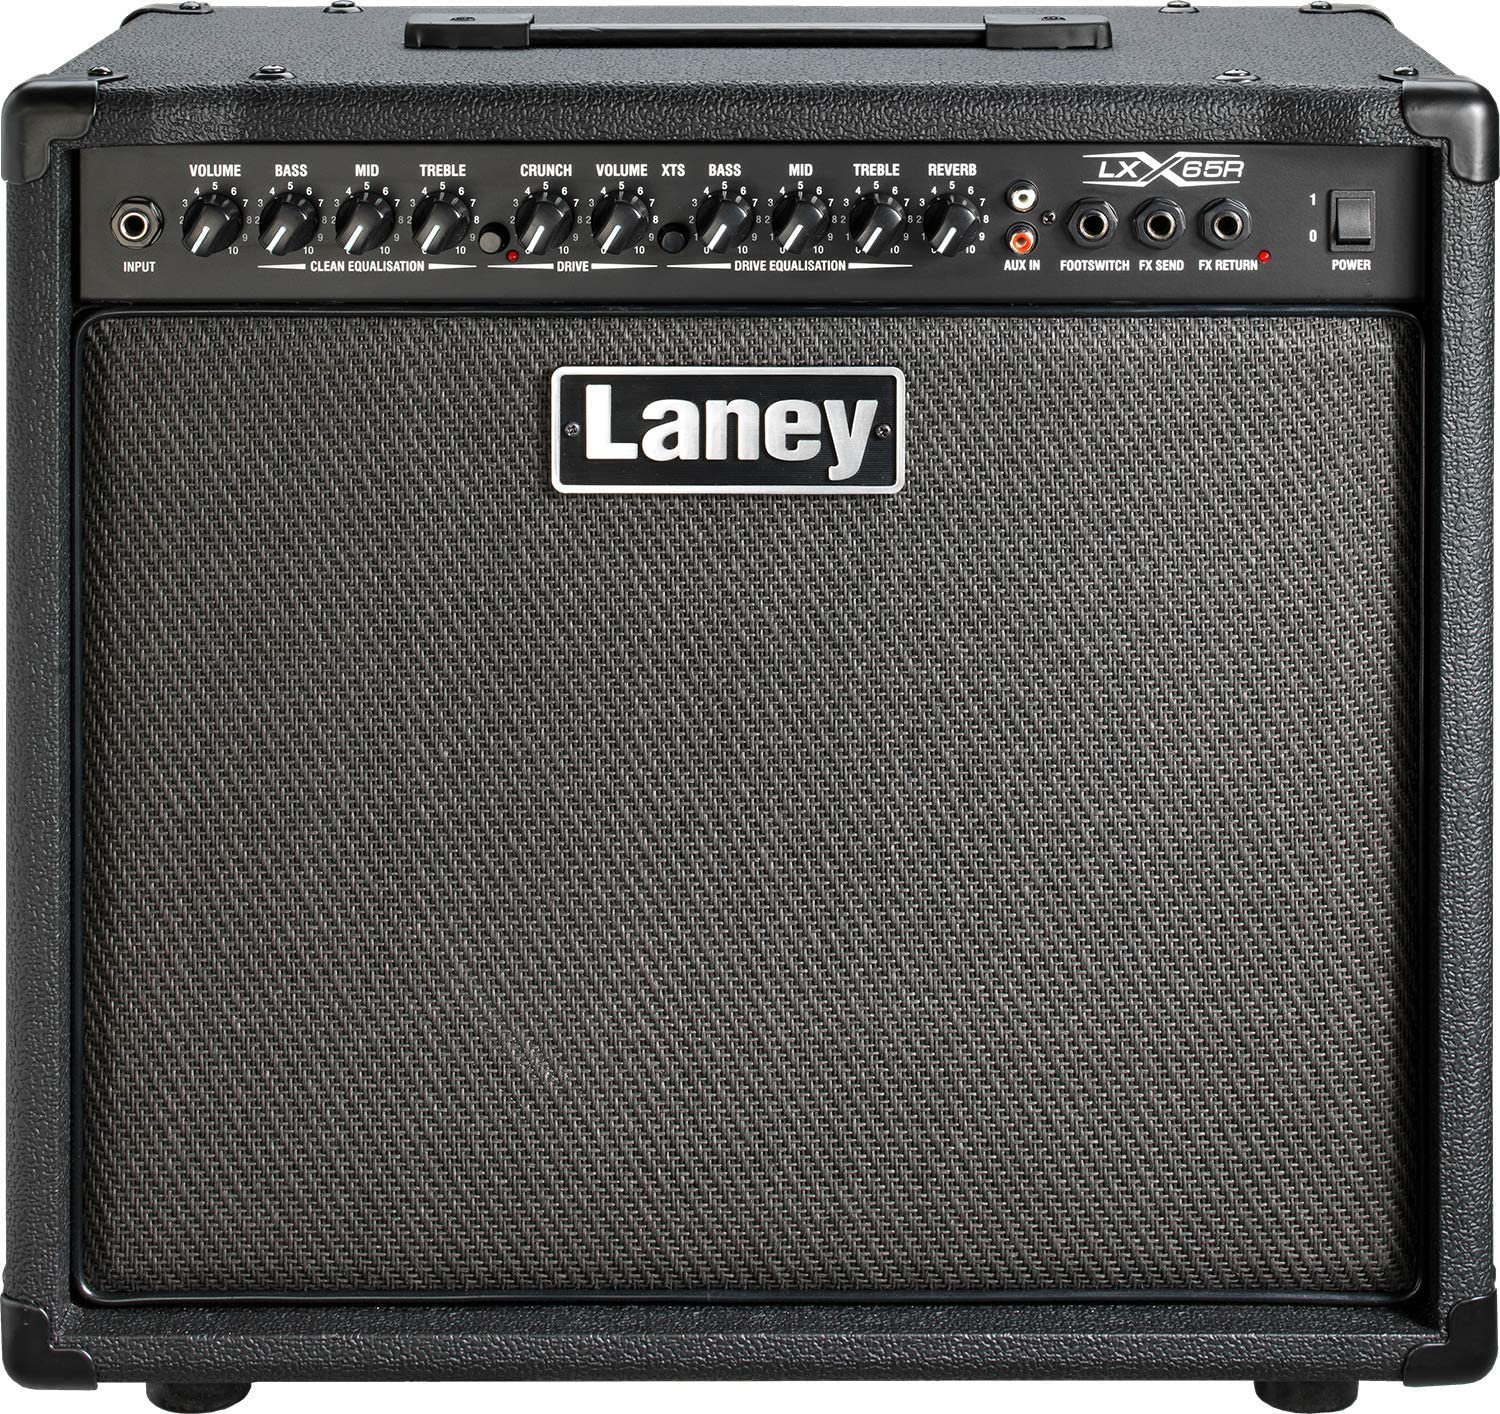 Laney LX Series LX65R - Guitar Combo Amplifier - 65watts 12inch Woofer with Reverb